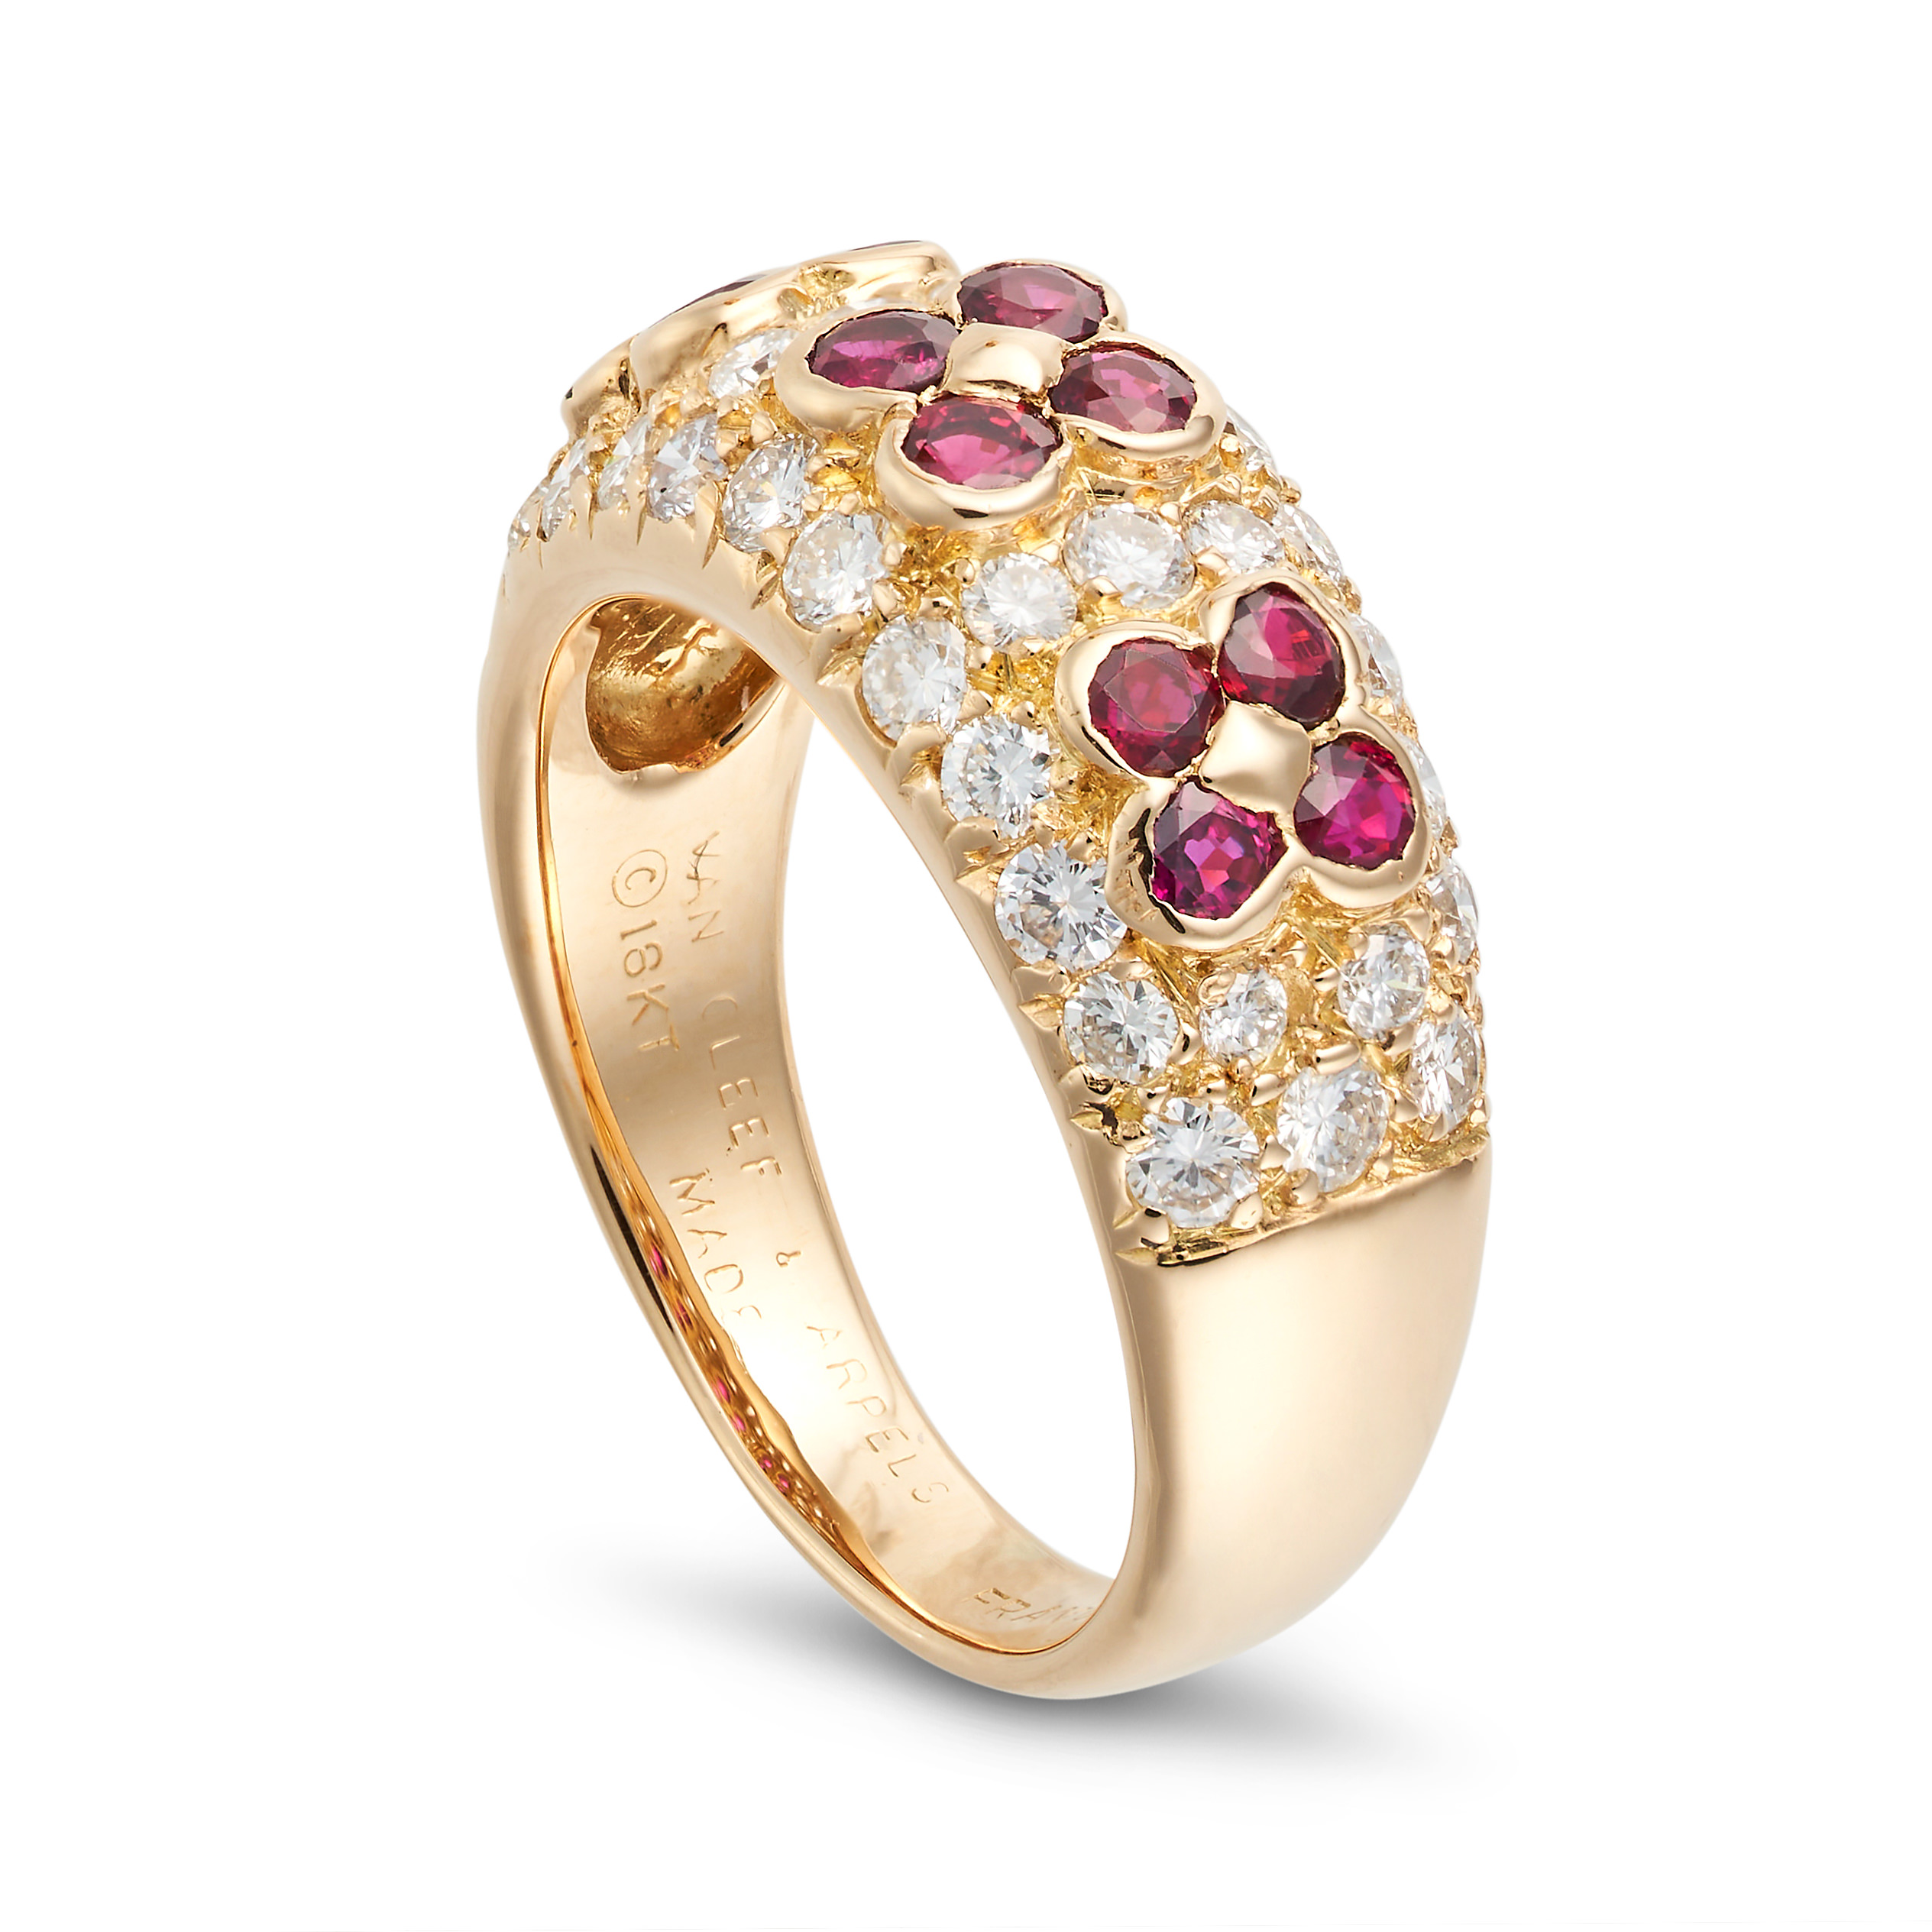 VAN CLEEF & ARPELS, A RUBY AND DIAMOND FLOWER RING in 18ct yellow gold, the bombe face set with r... - Image 2 of 2